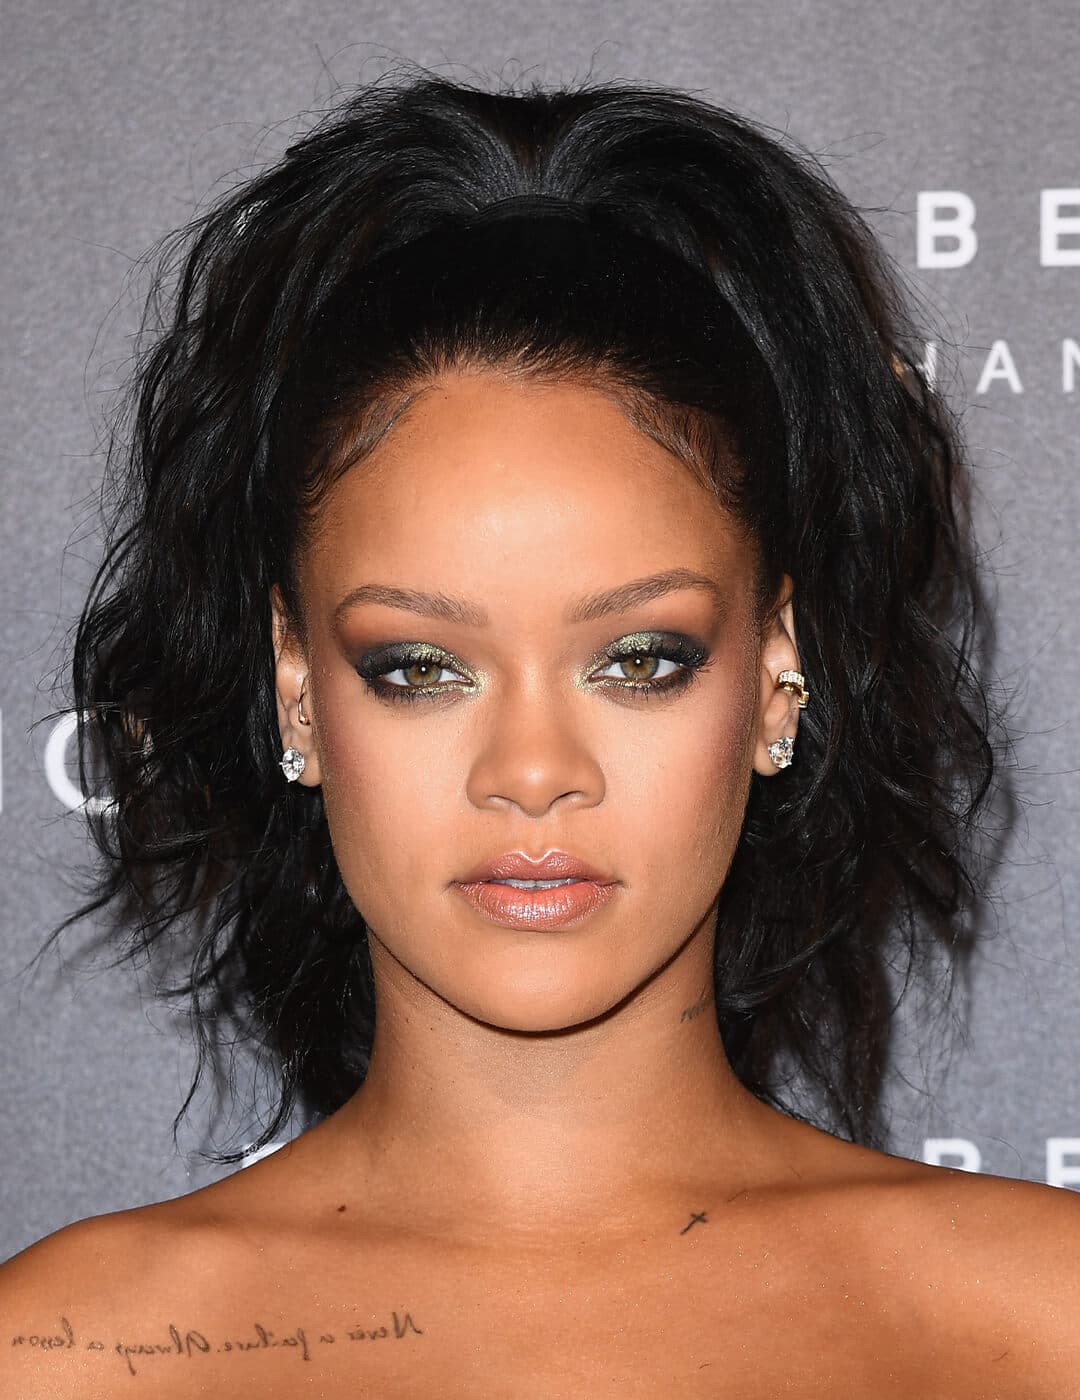 Rihanna looking glam in a smokey eyeshadow look and high ponytail hairstyle